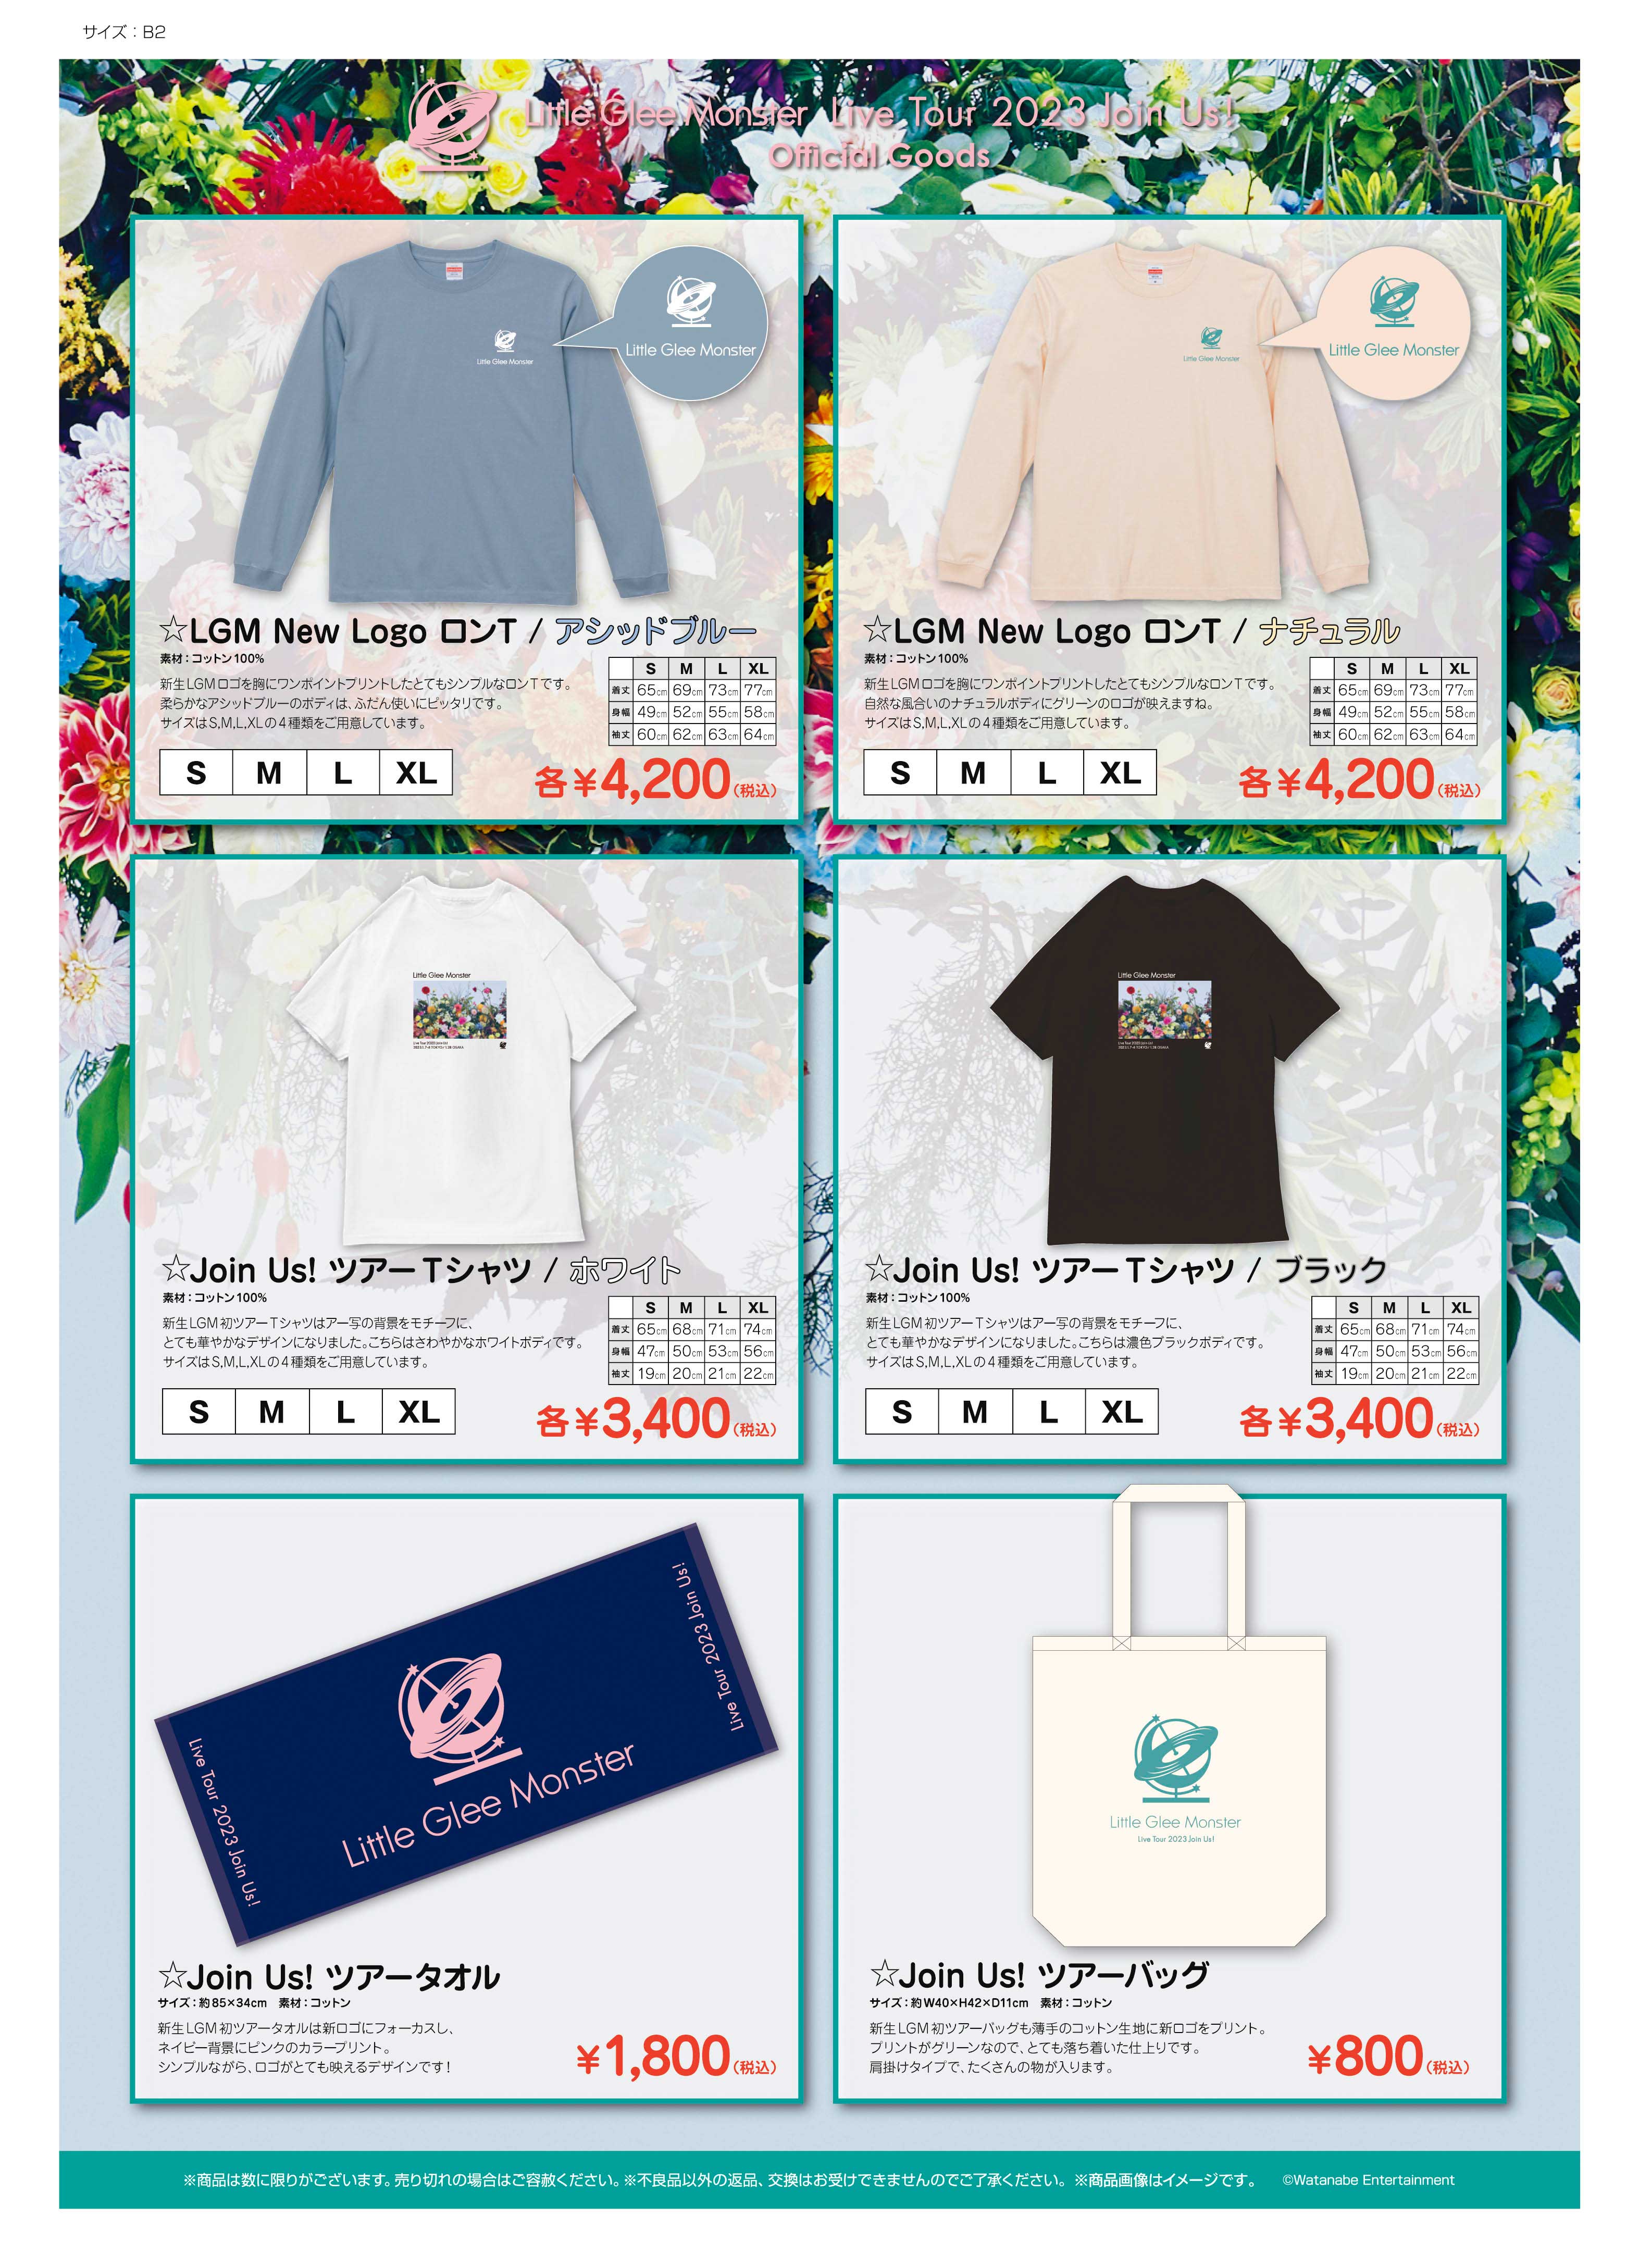 GOODS│Little Glee Monster Live Tour 2023 Join Us! Special Site